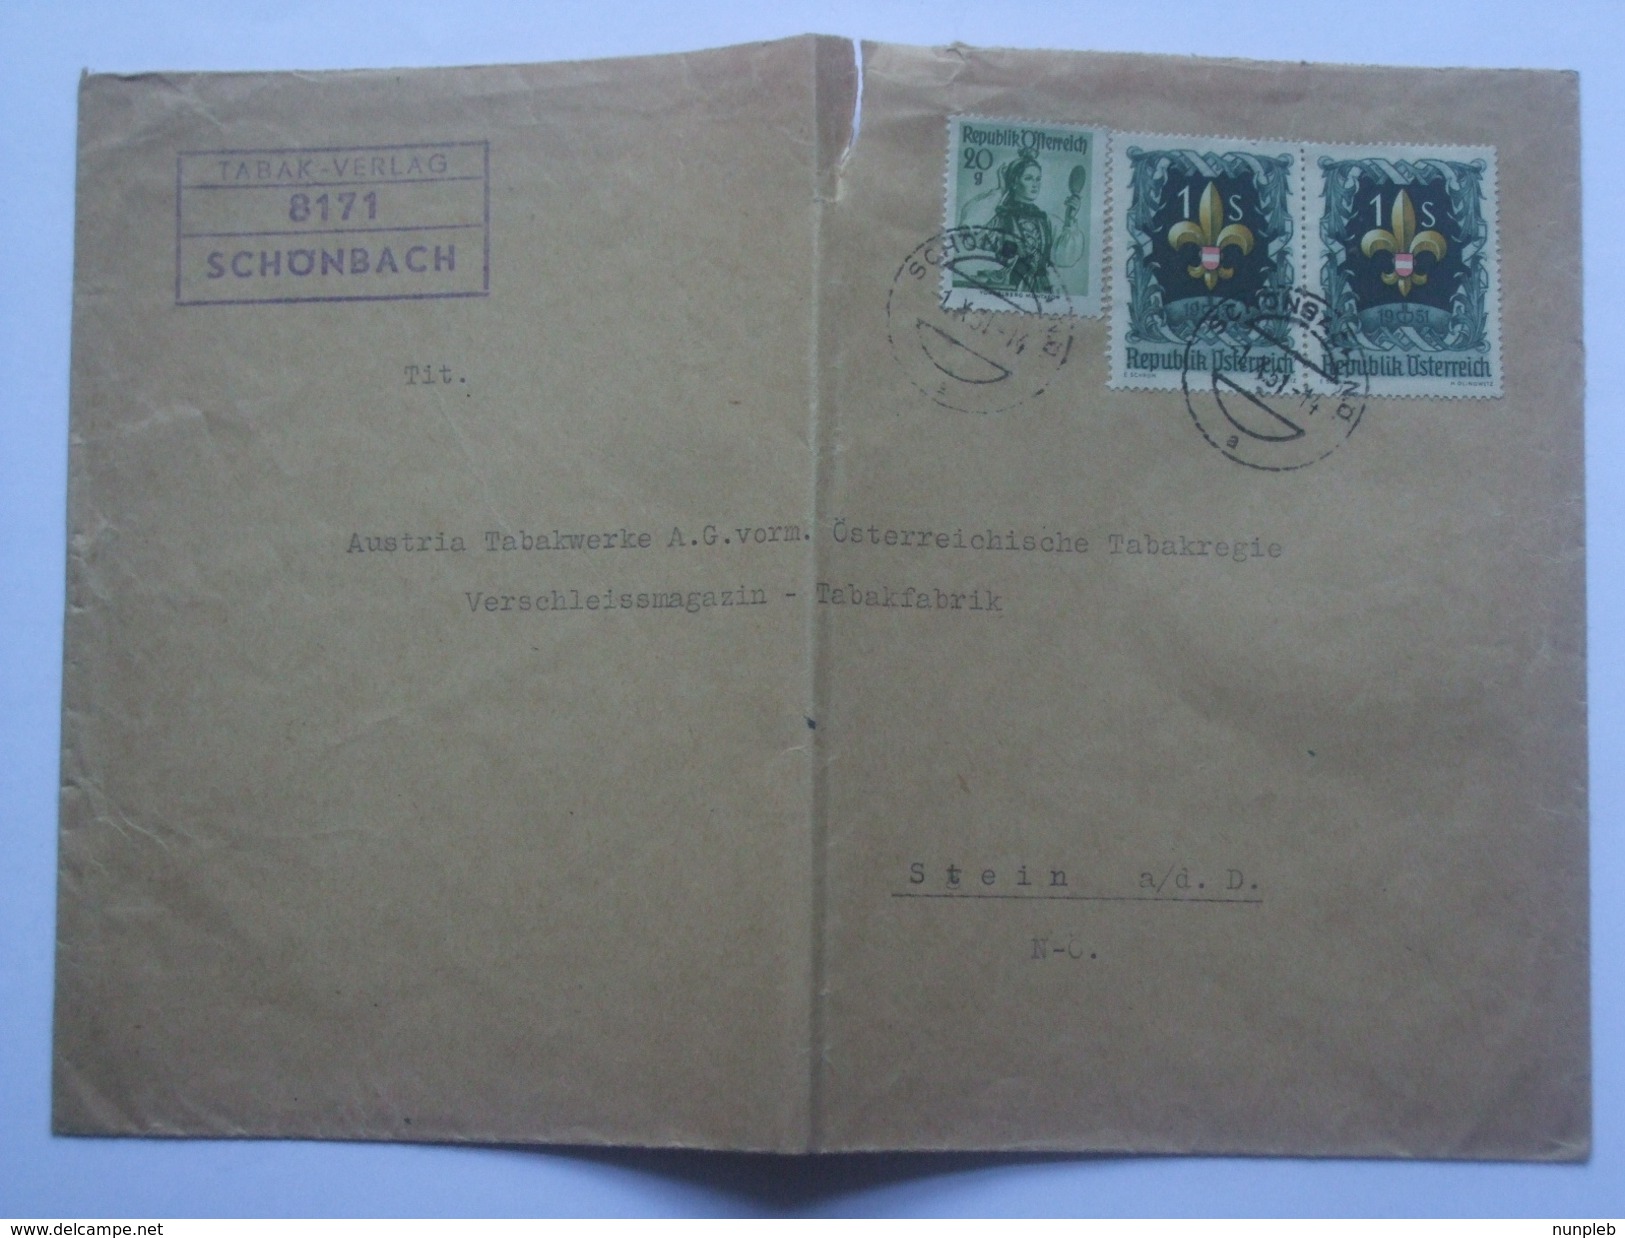 AUSTRIA 1951 COVER SCHONBACH TO STEIN WITH SCOUT JAMBOREE STAMPS - Covers & Documents